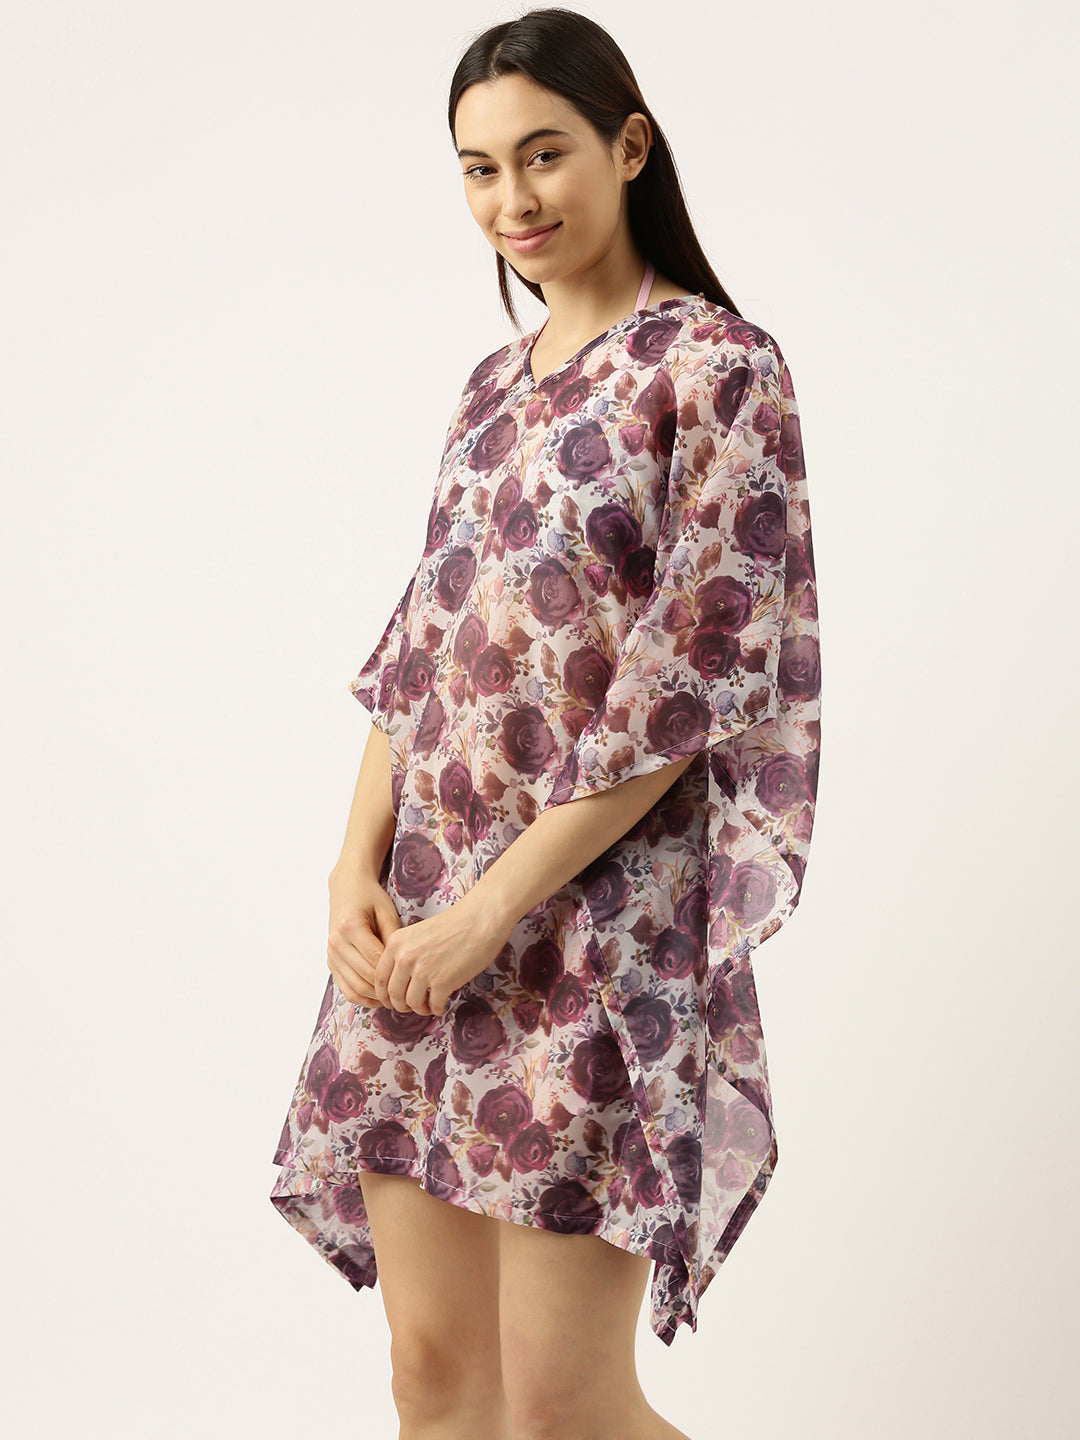 S84 Women Printed Beach Cover Up - Clt.s